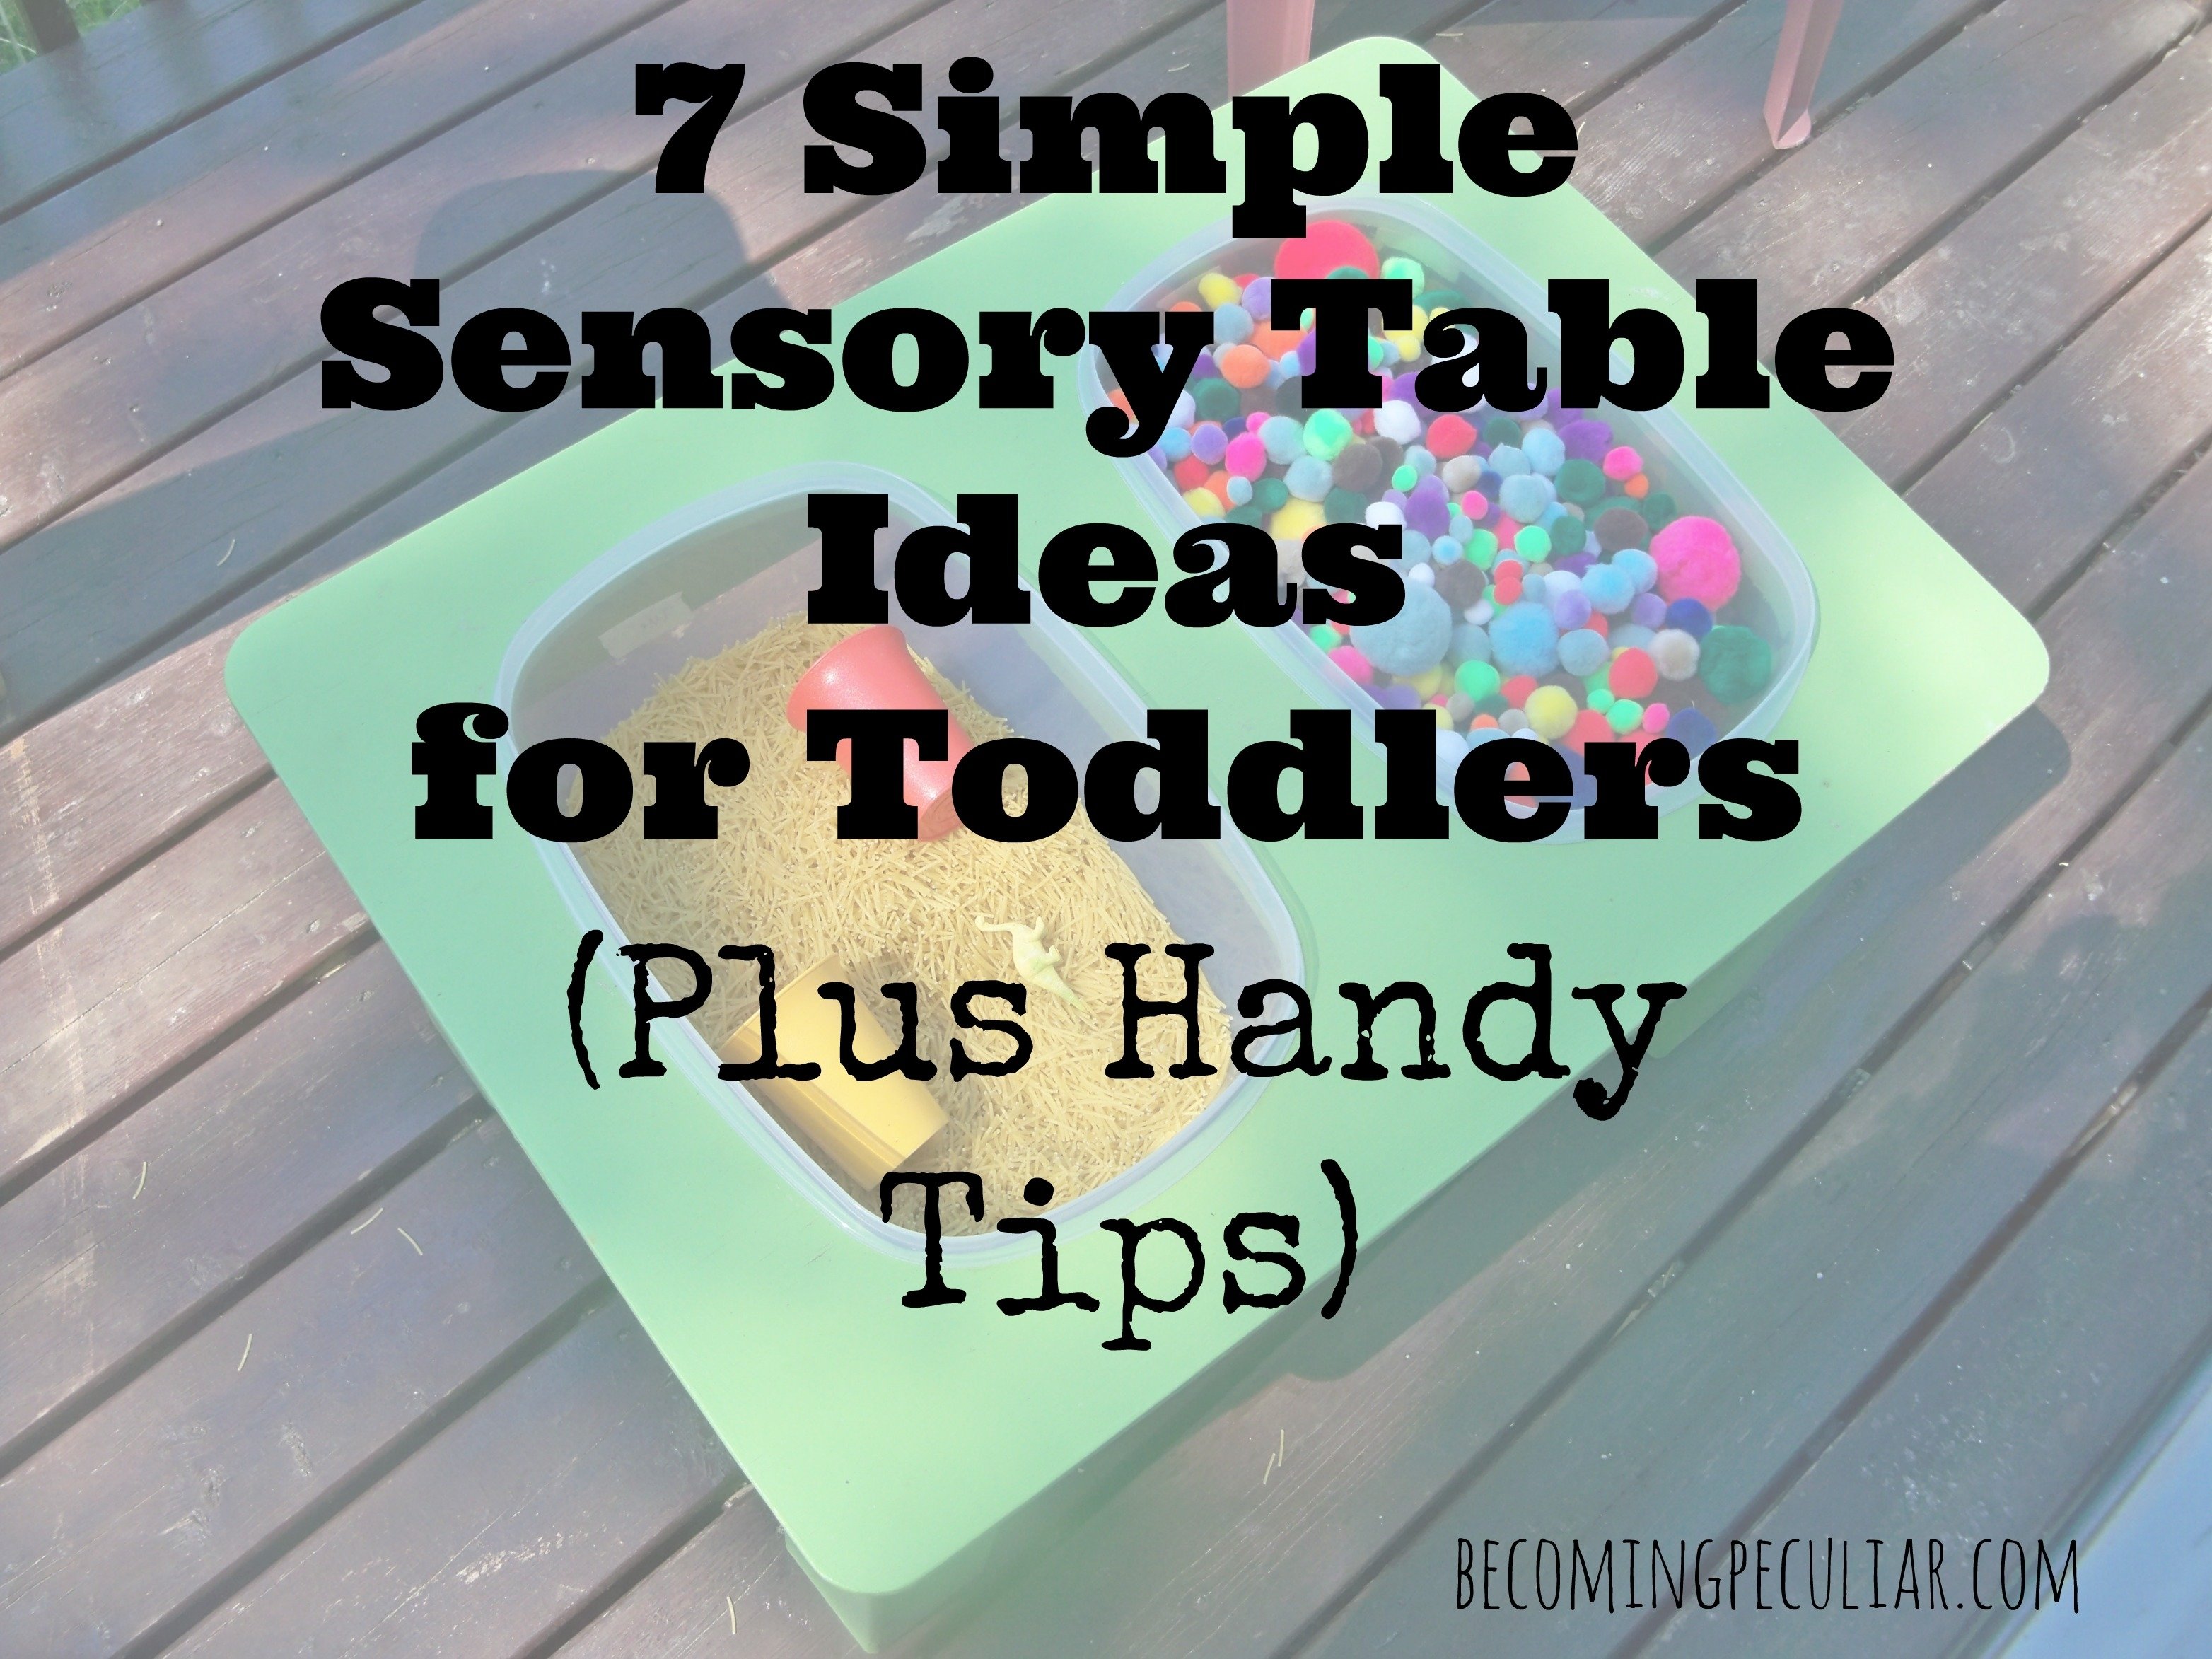 10 Trendy Sensory Table Ideas For Preschoolers raising a low media toddler the sensory table to the rescue 3 2022